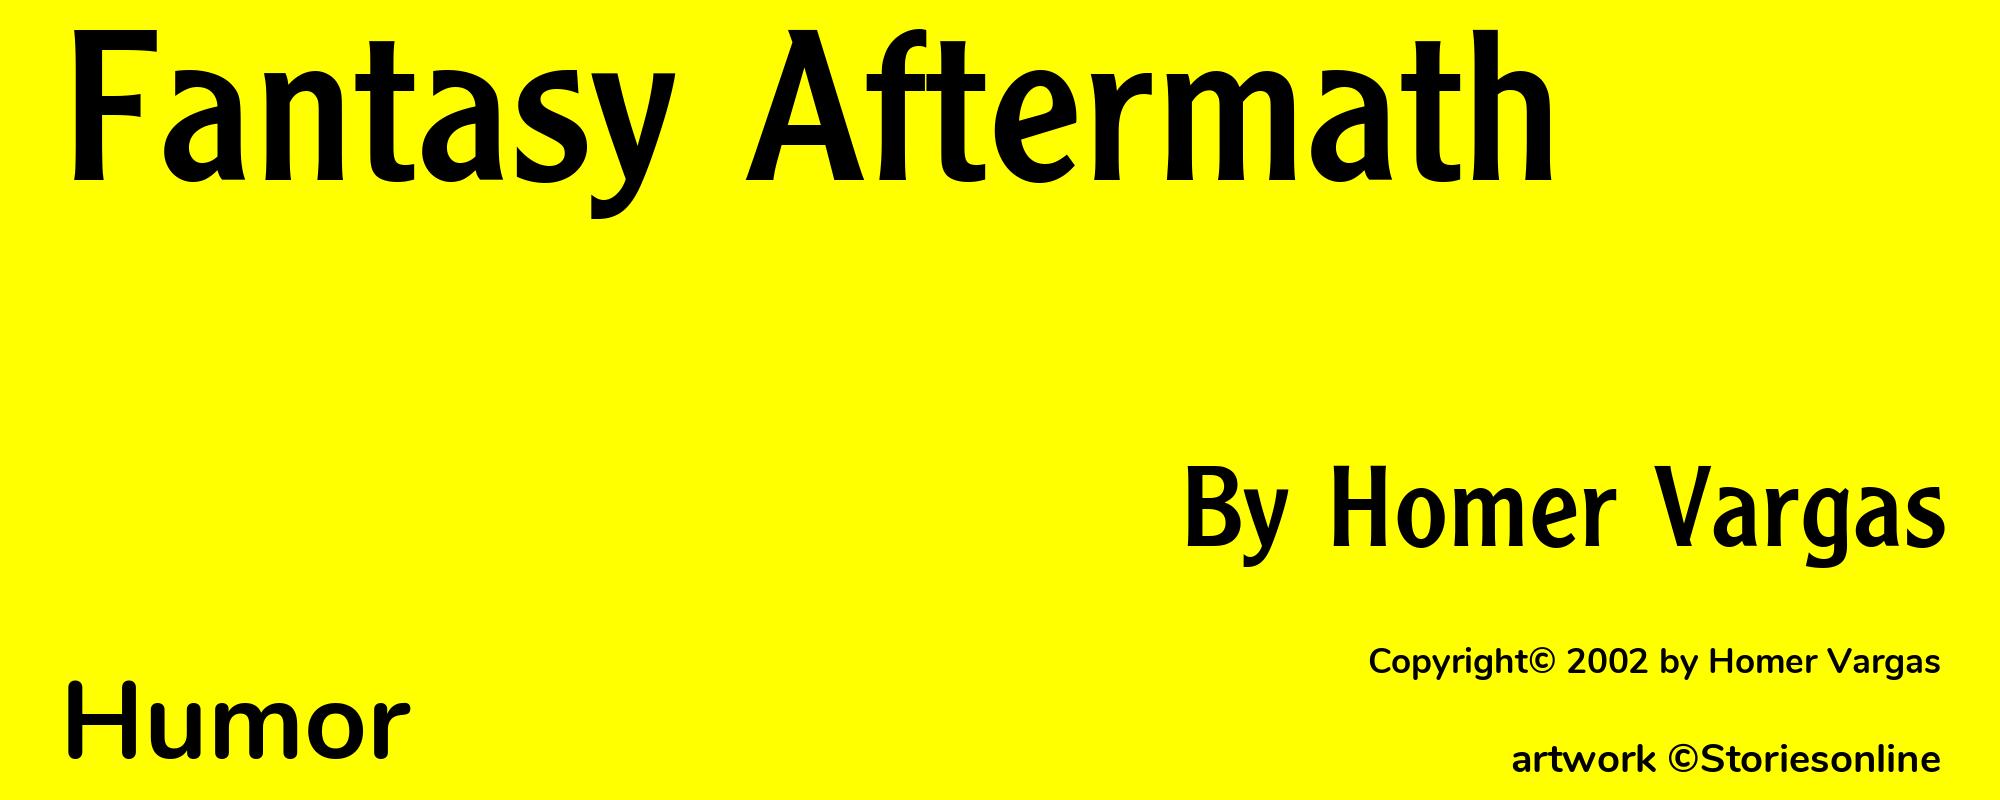 Fantasy Aftermath - Cover